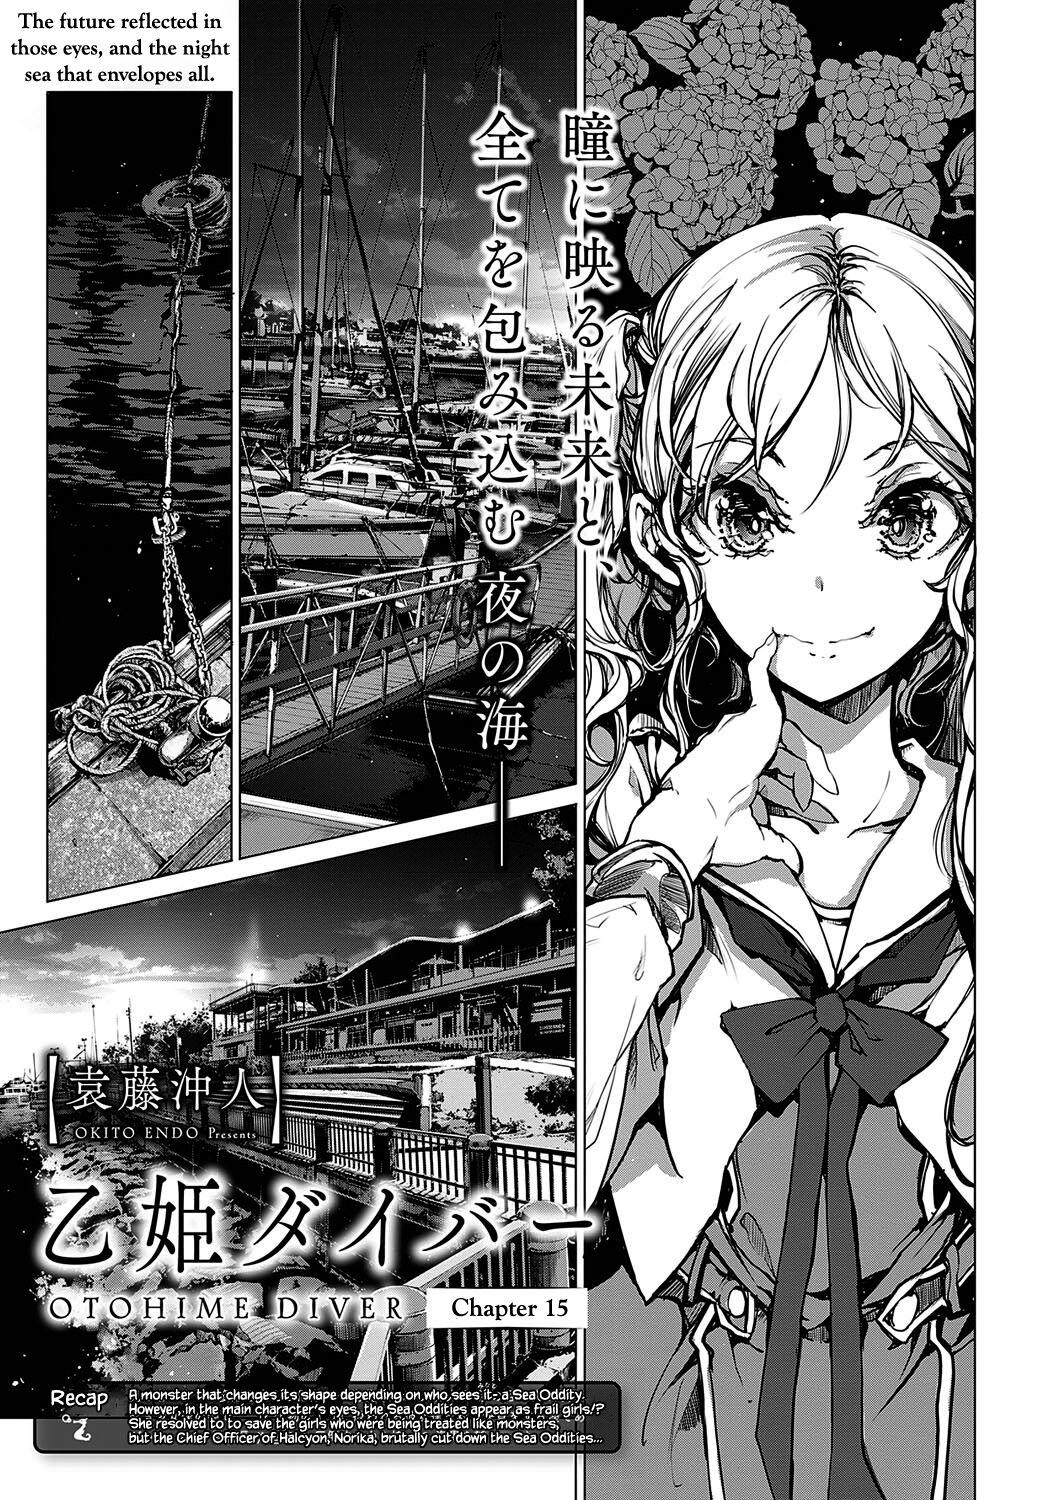 Otohime Diver Chapter 15 0